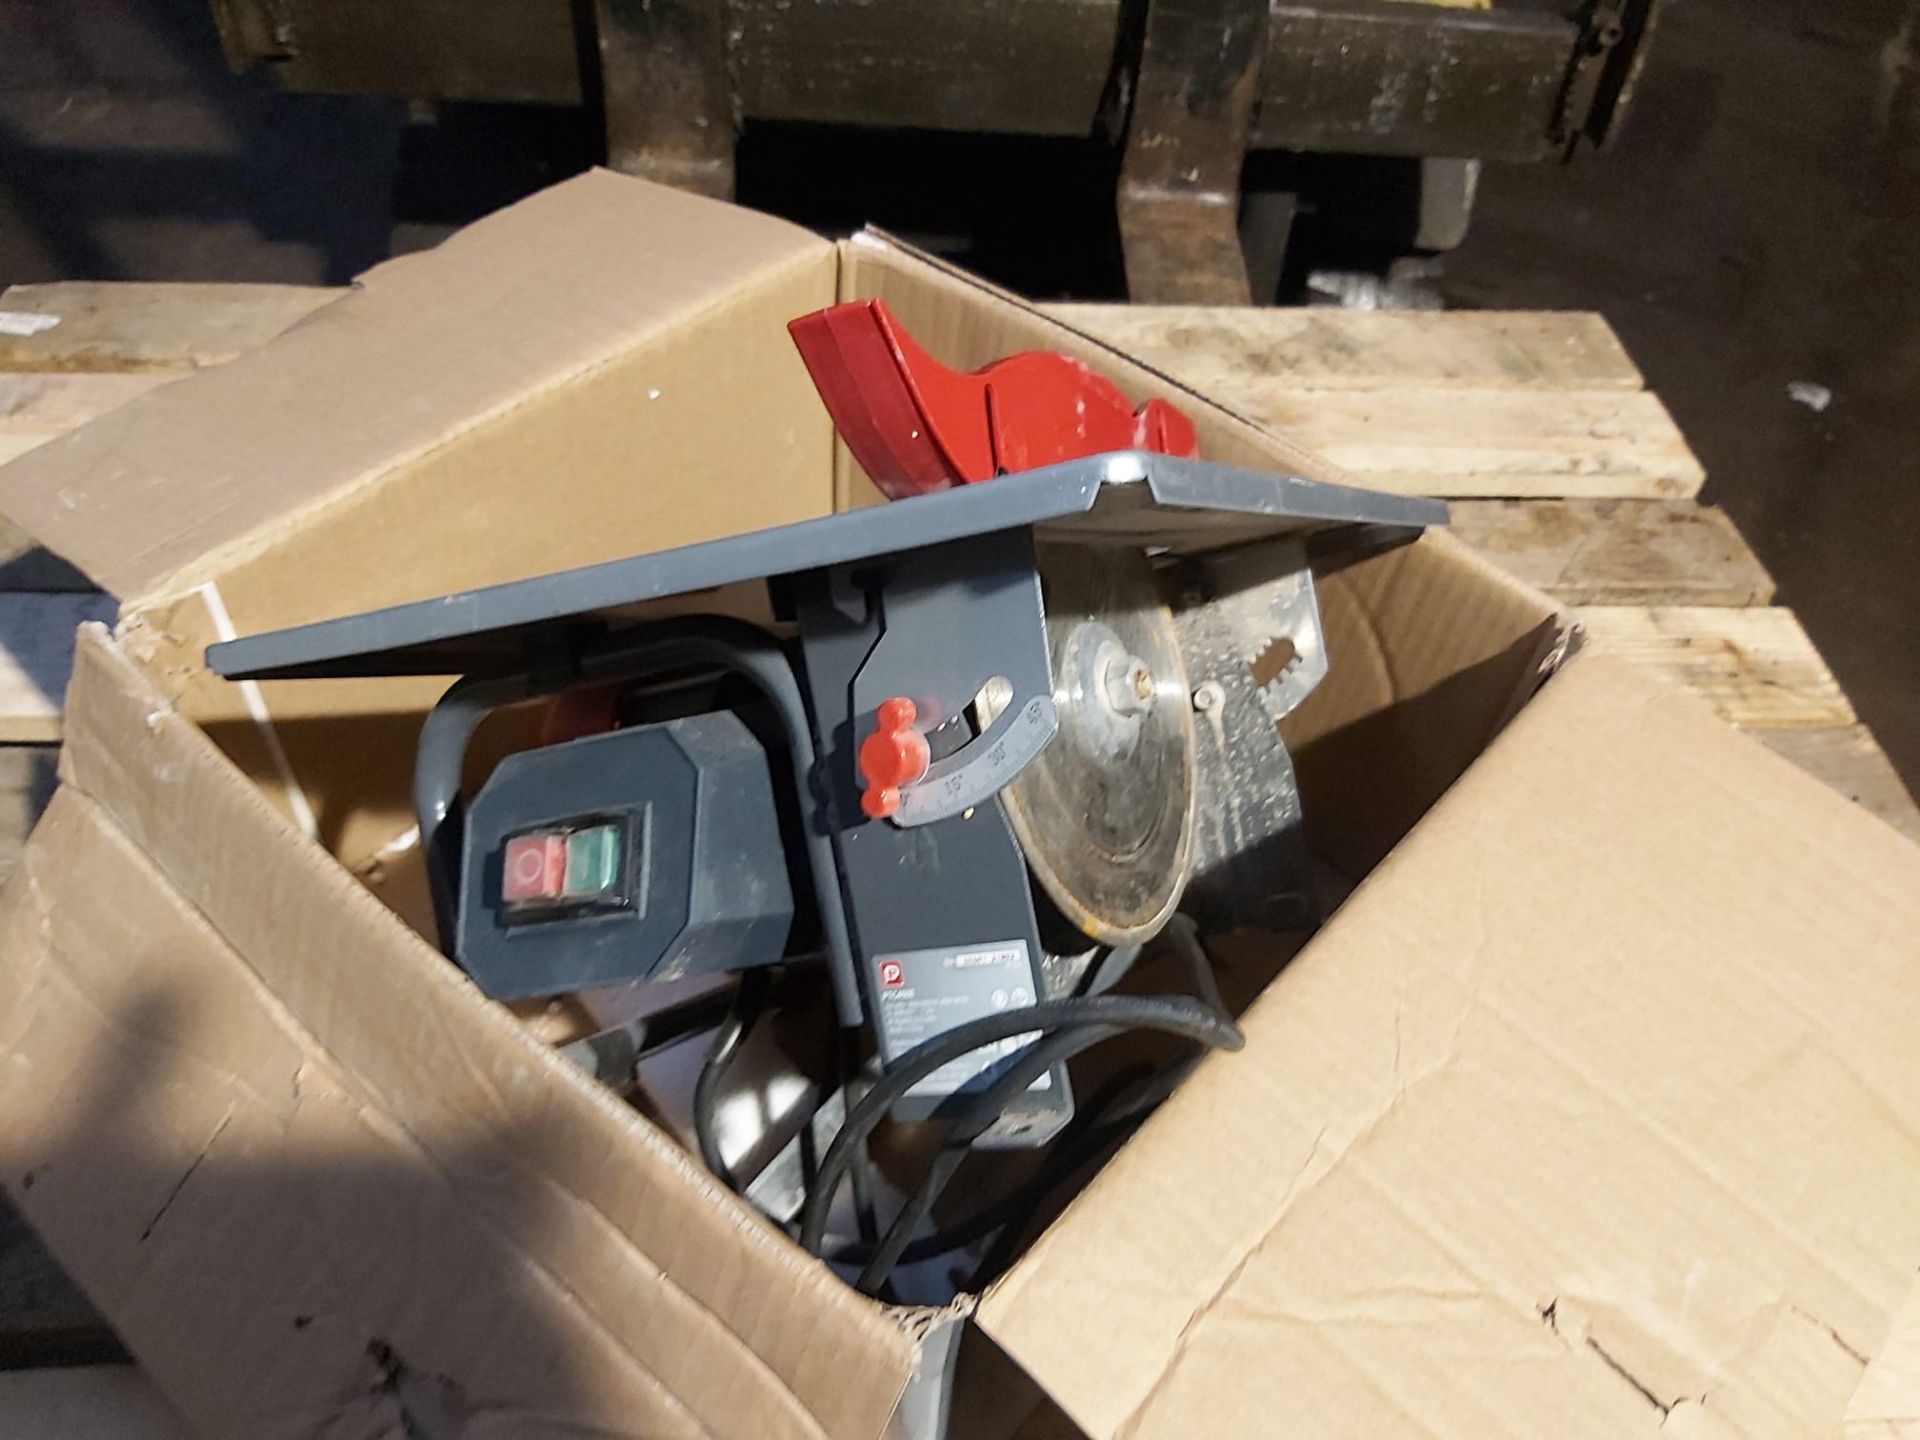 250W TILE CUTTER IN BOX *PLUS VAT* - Image 2 of 3